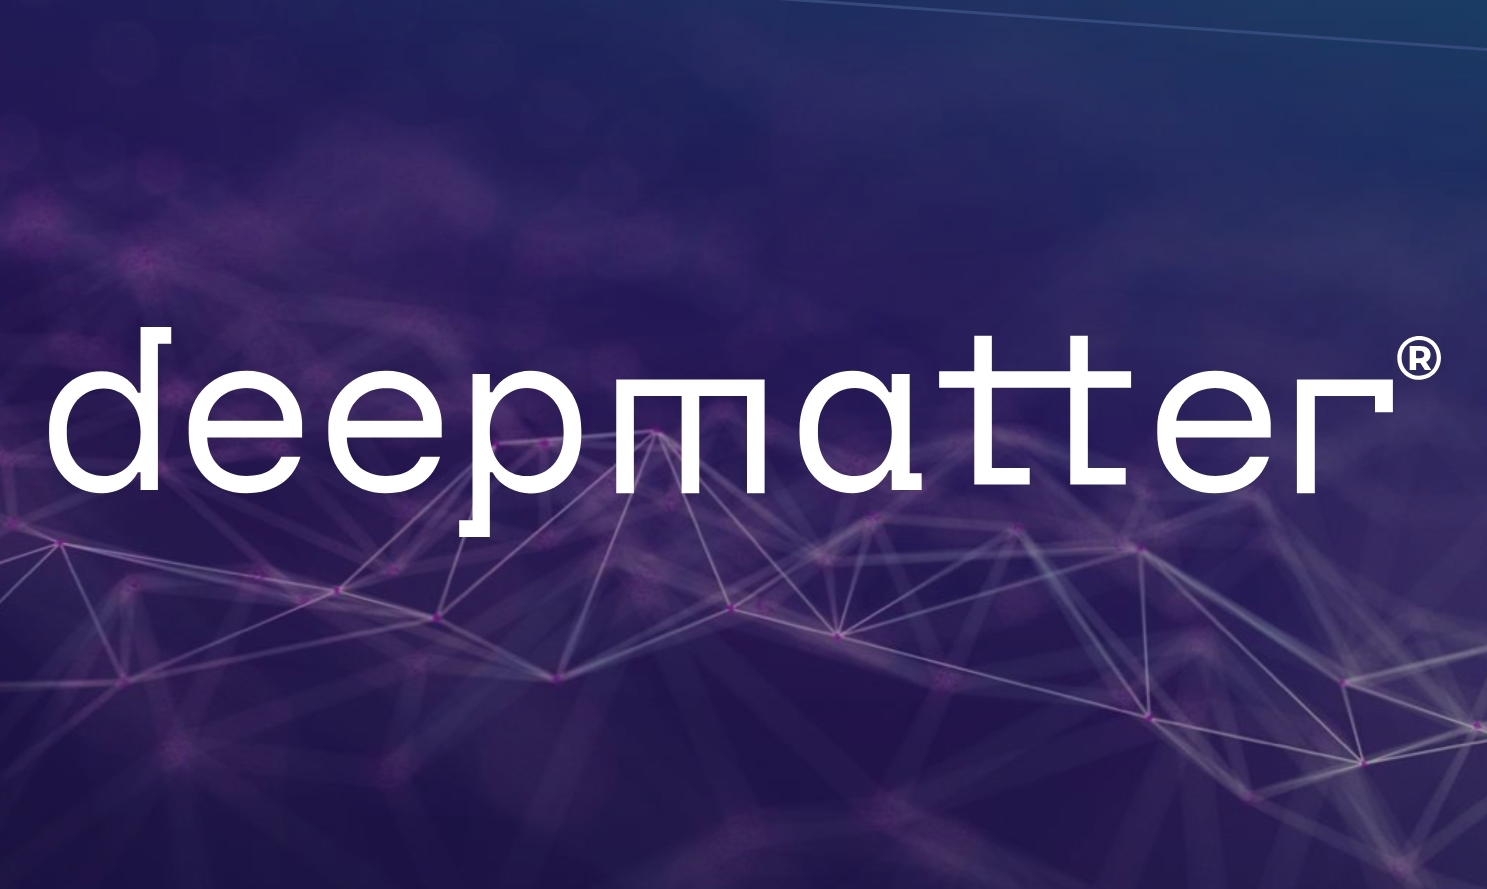 Glasgow-based Deepmatter considers delisting and going private